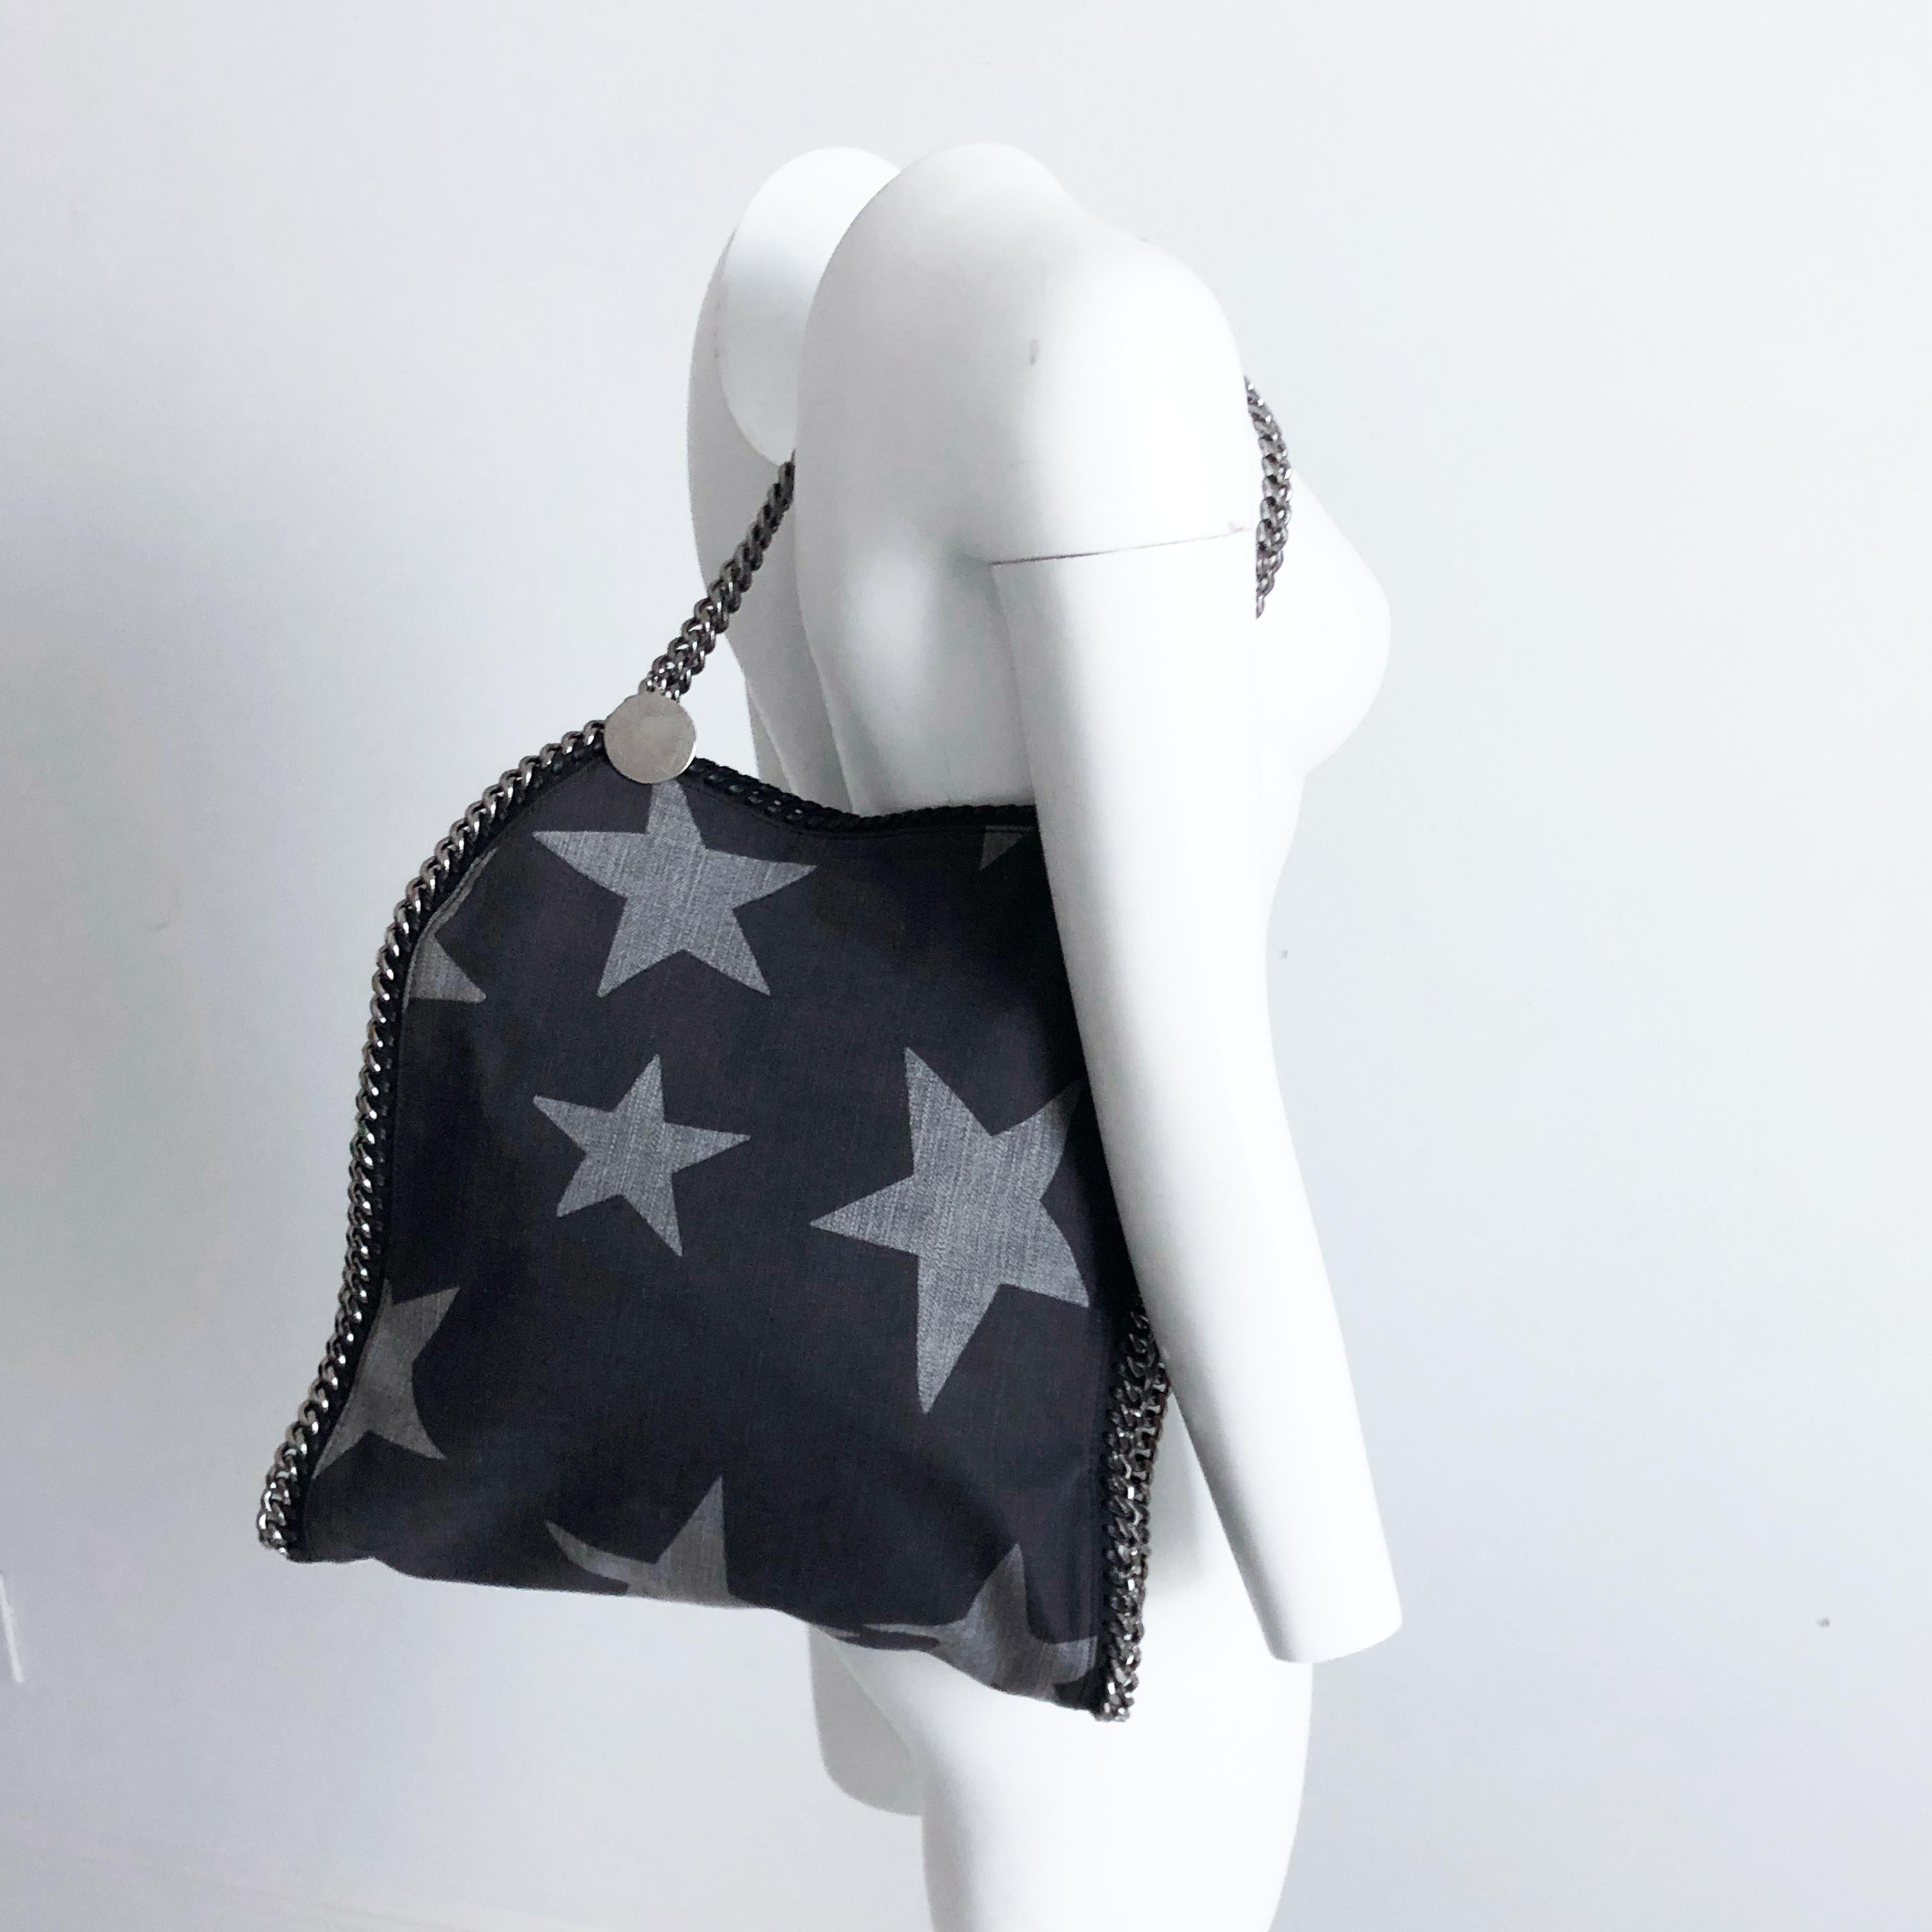 Authentic, preowned Stella McCartney Denim Star Small Falabella Tote. Made from dark washed denim with a decorative star printed pattern. It's bordered w/silver chain links that make a continuous chain shoulder straps. Magnetic closure/jacquard